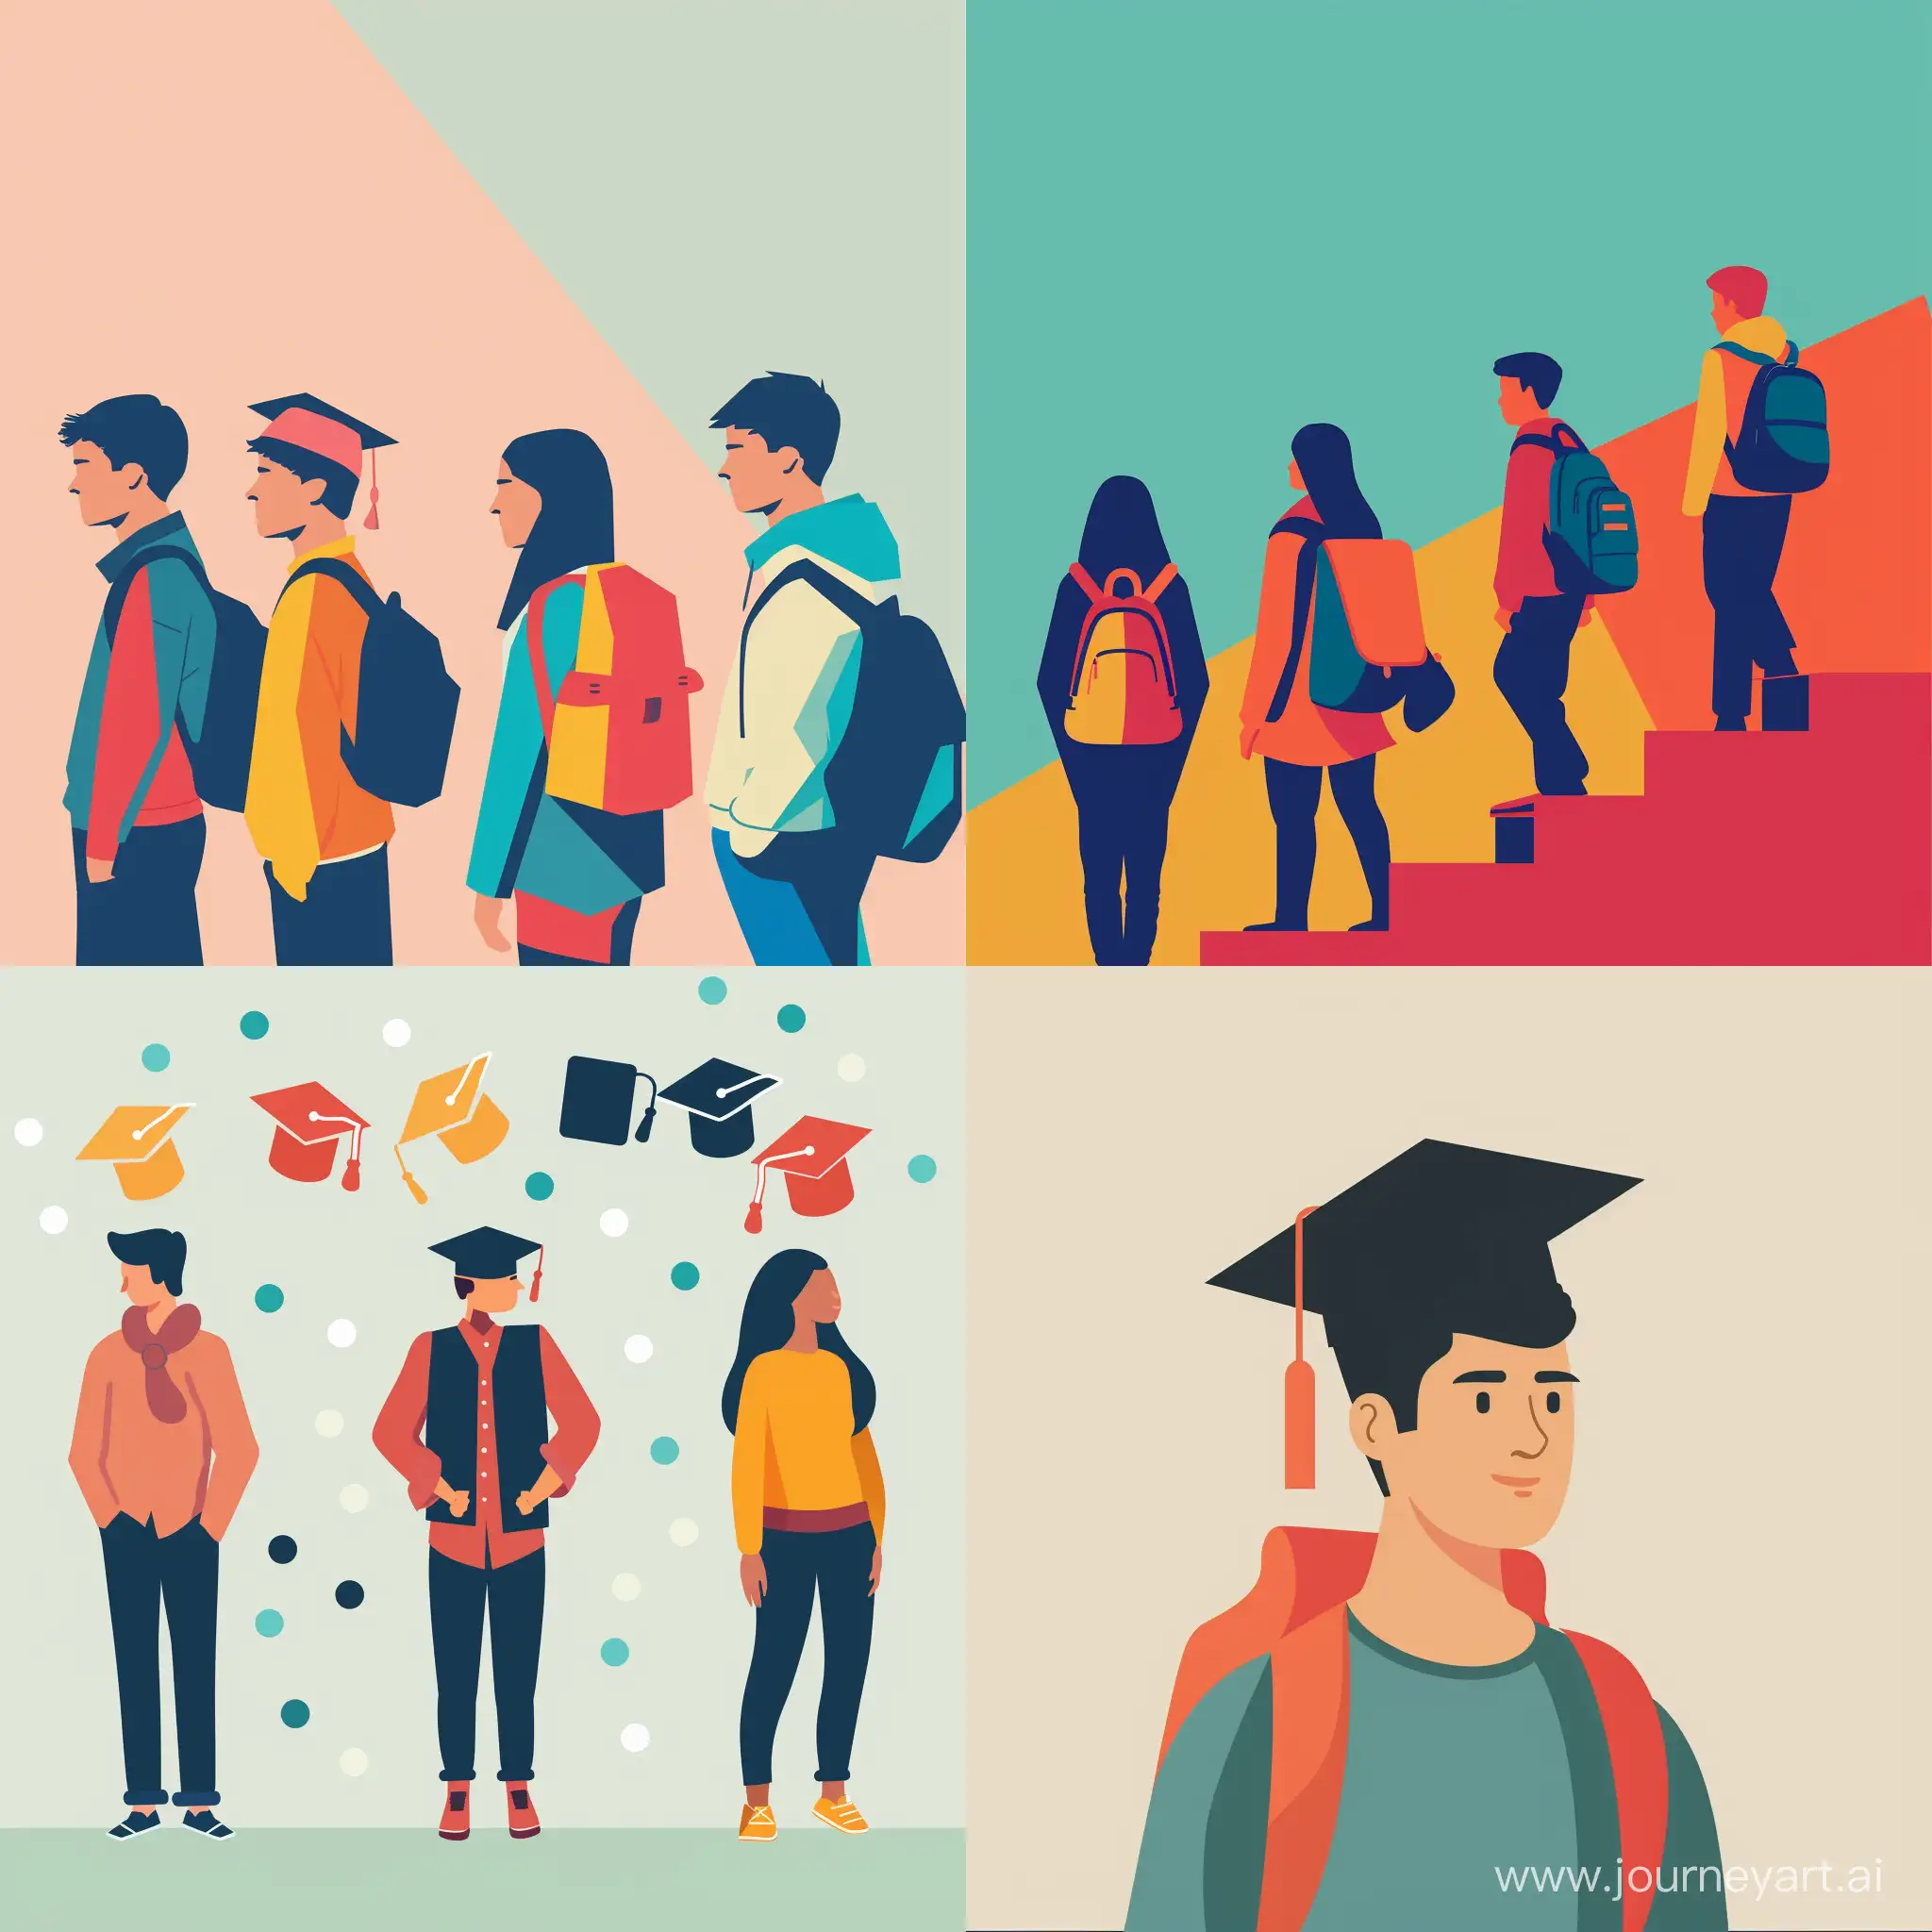 illustration a minimal graphic image about "High-paying jobs for students and teenagers" with a plain color background

